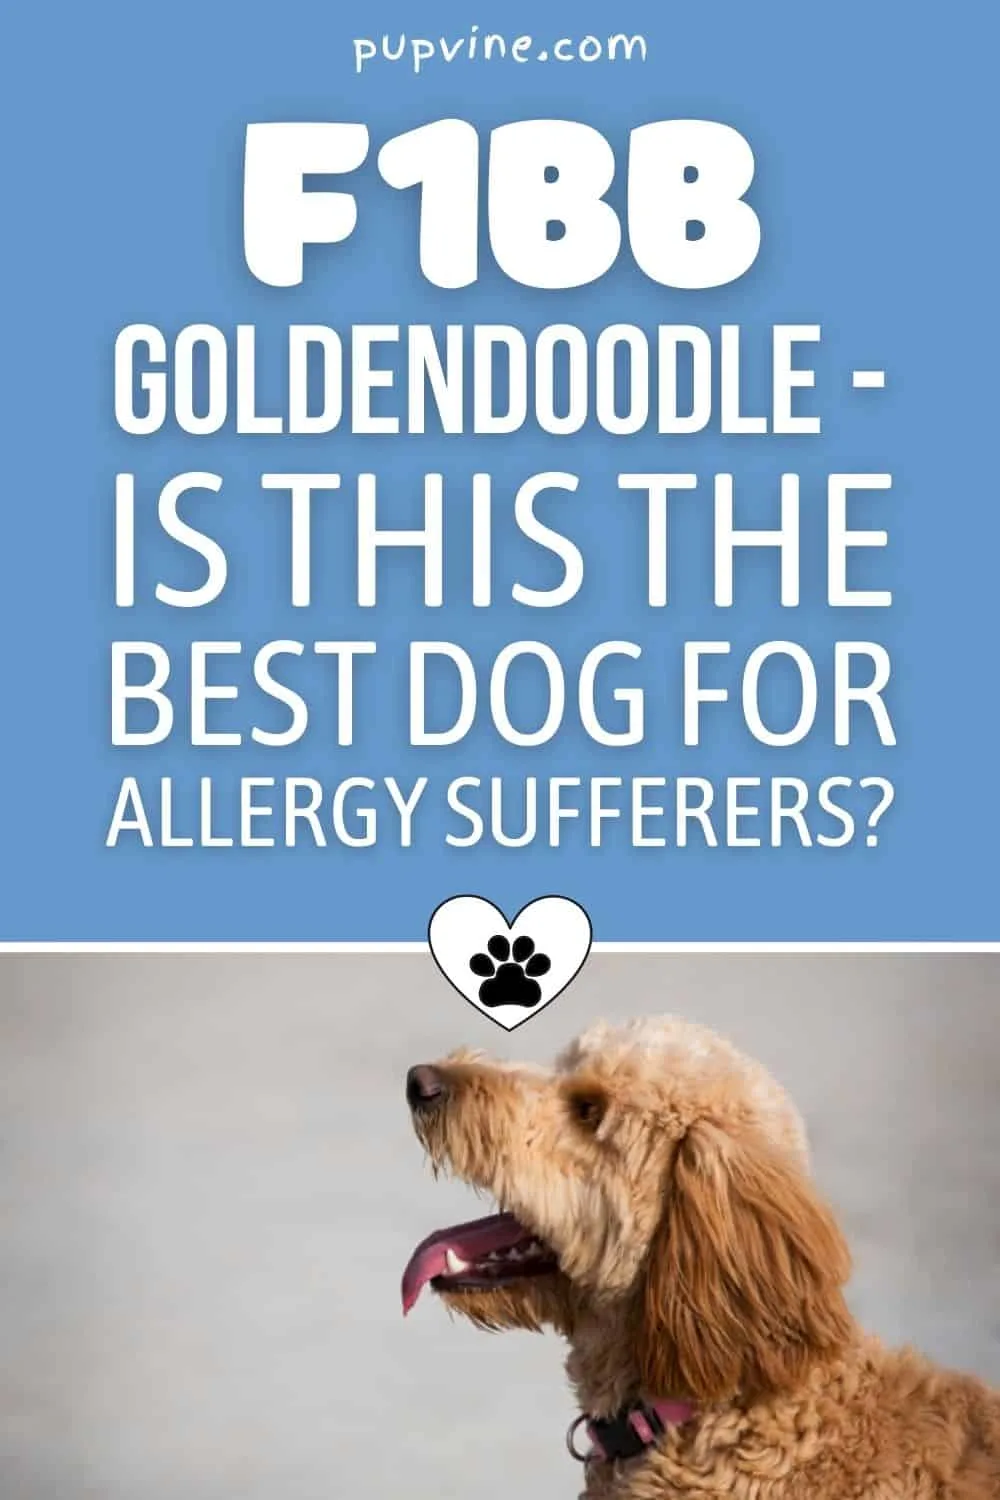 F1BB Goldendoodle - Is This The Best Dog For Allergy Sufferers?